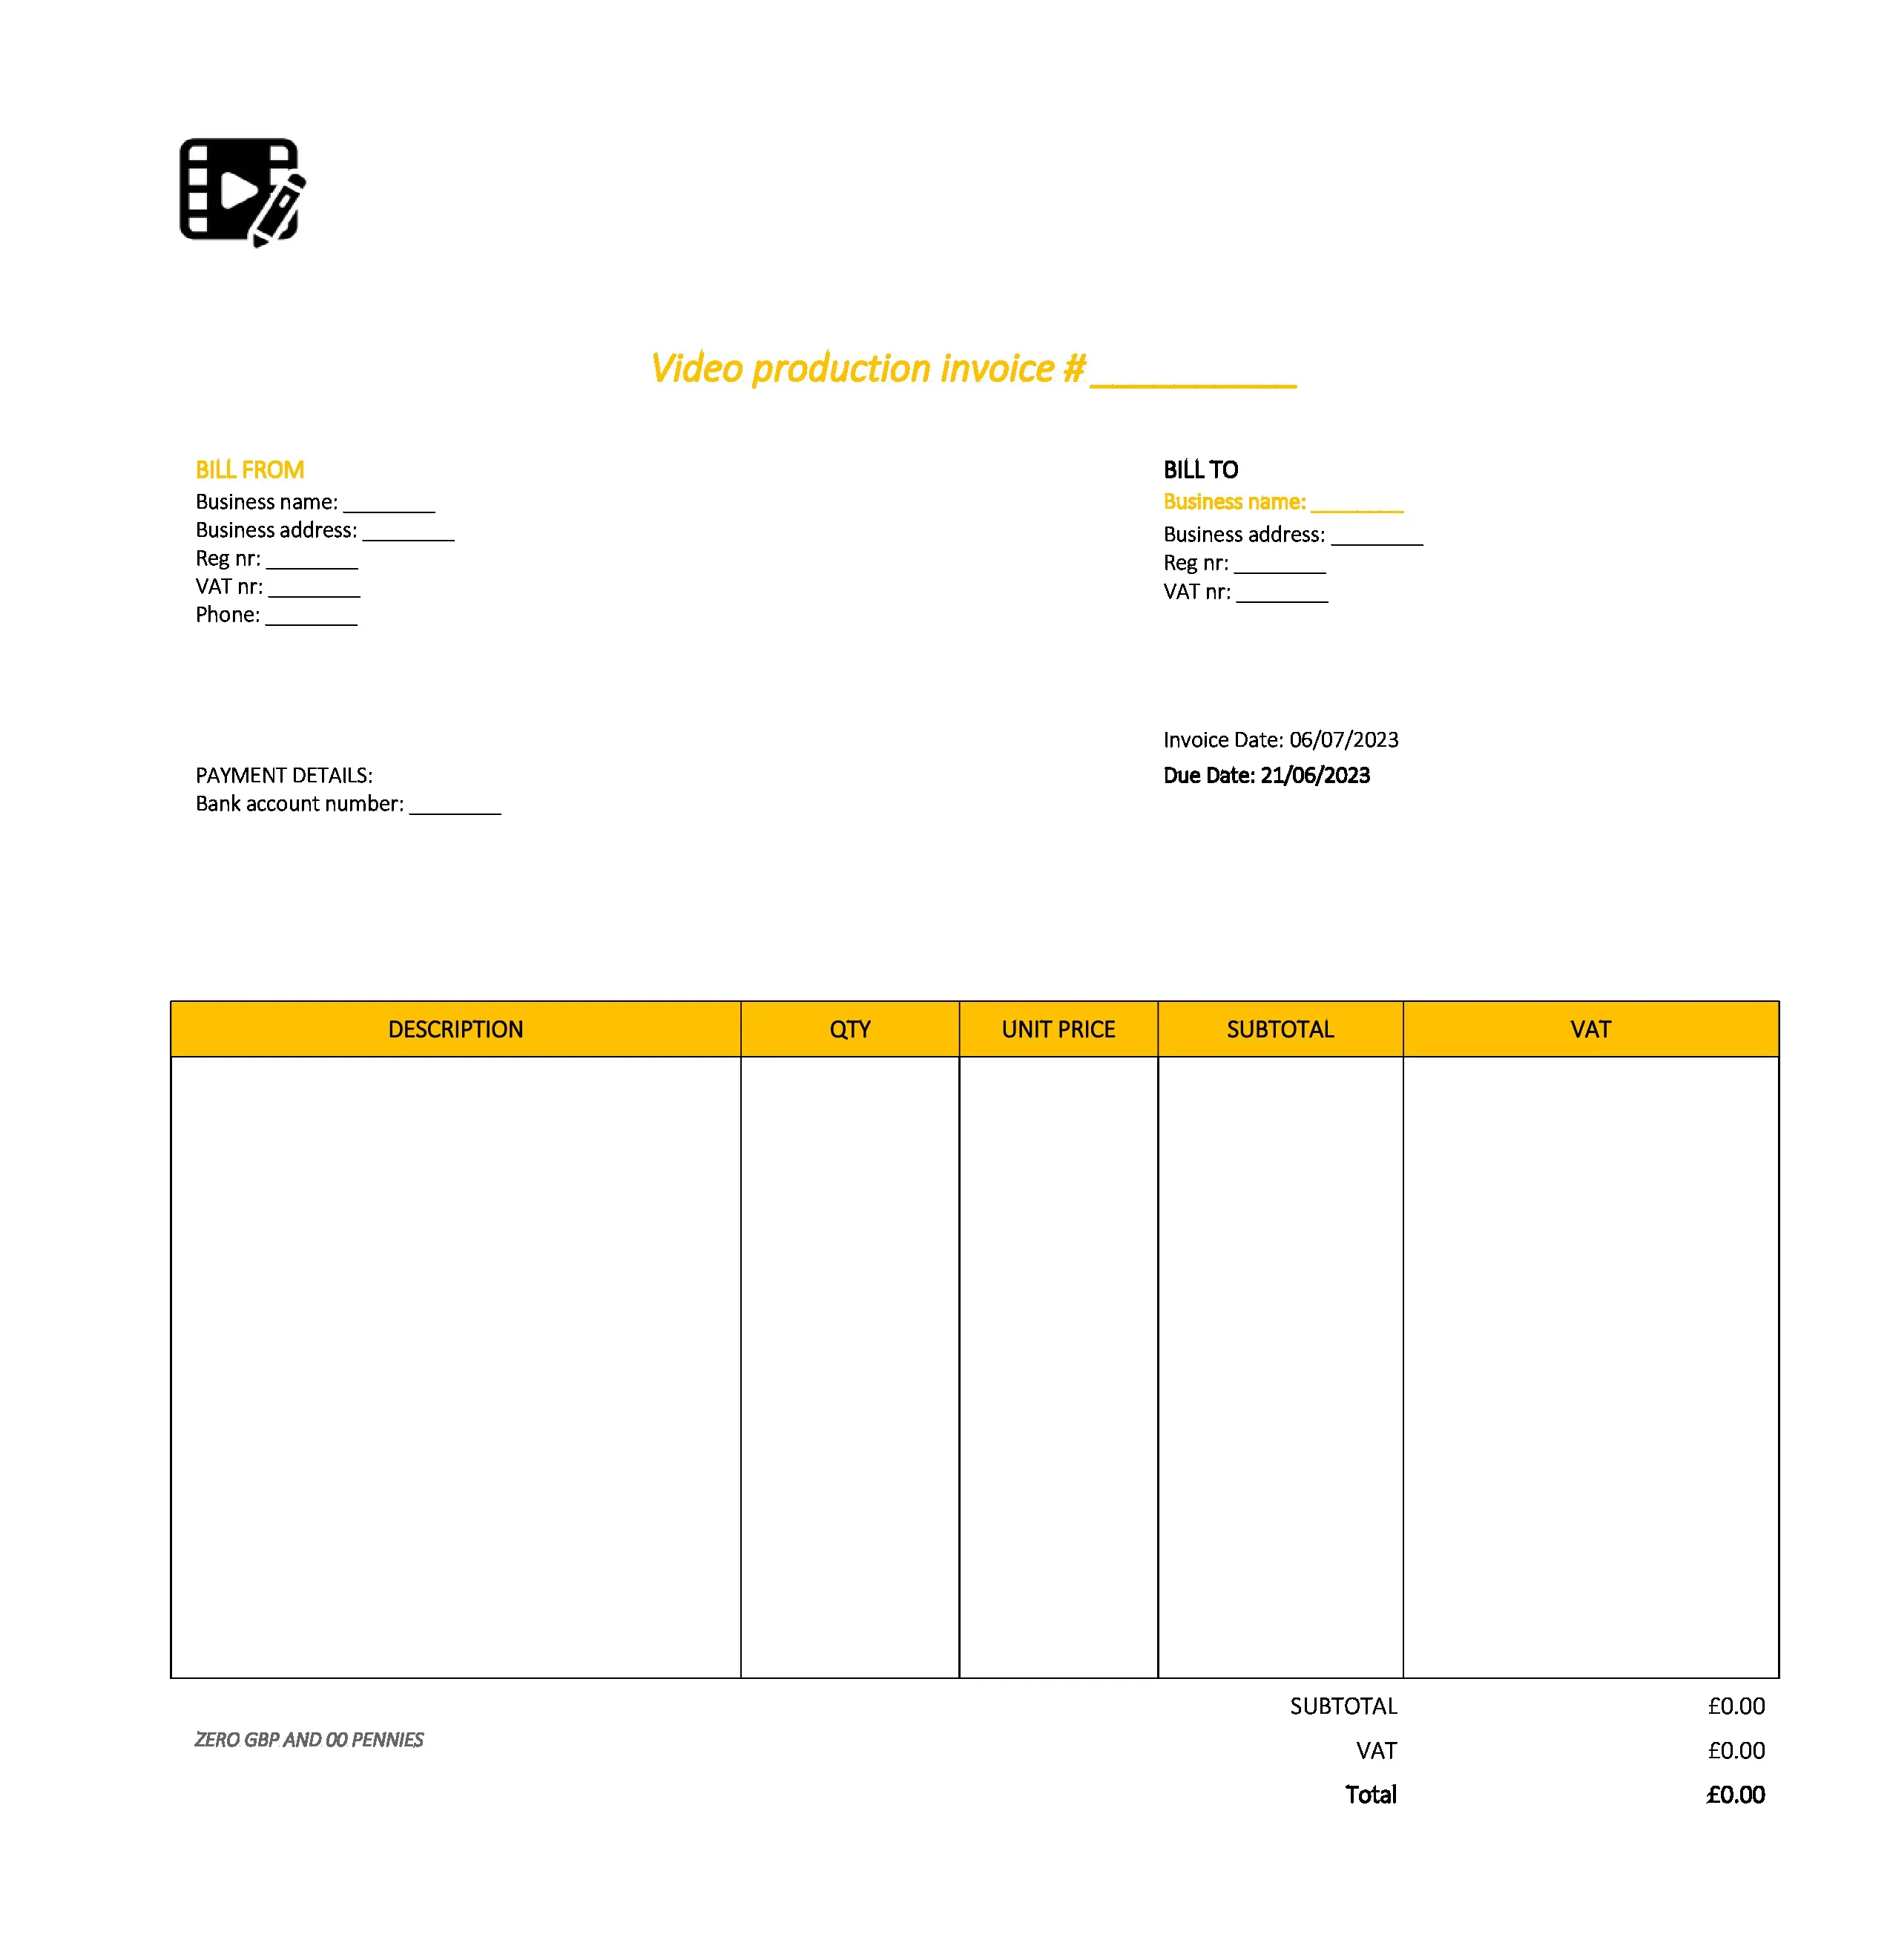 draft video production invoice template UK Excel / Google sheets